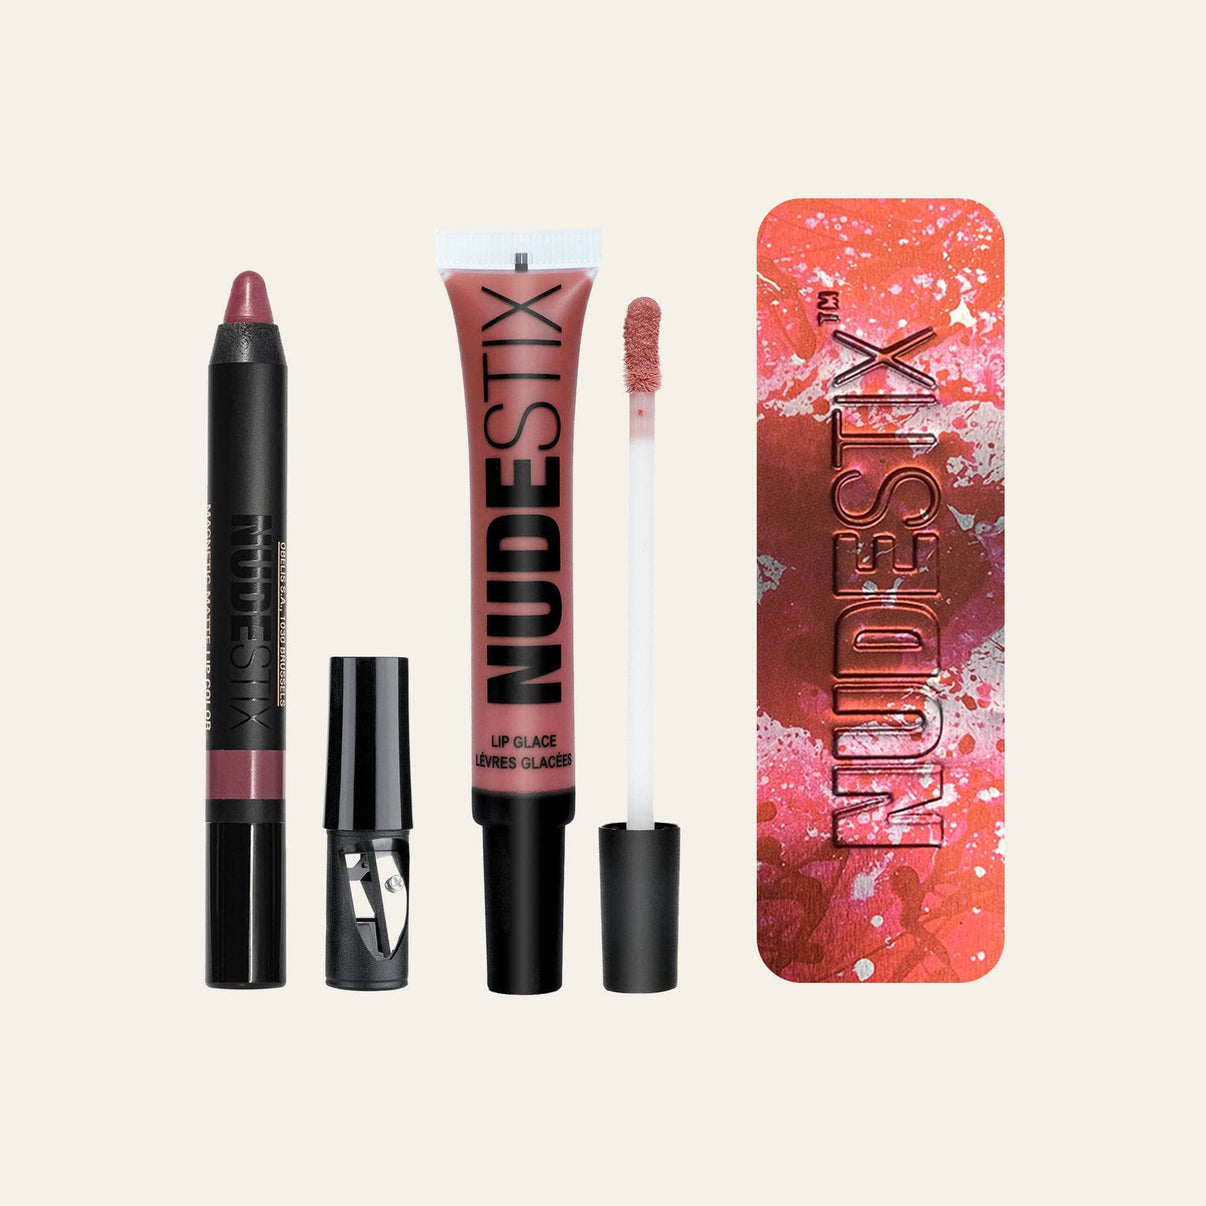 Protect, Perfect + Plump Lip Kit in Pink with Nudestix can